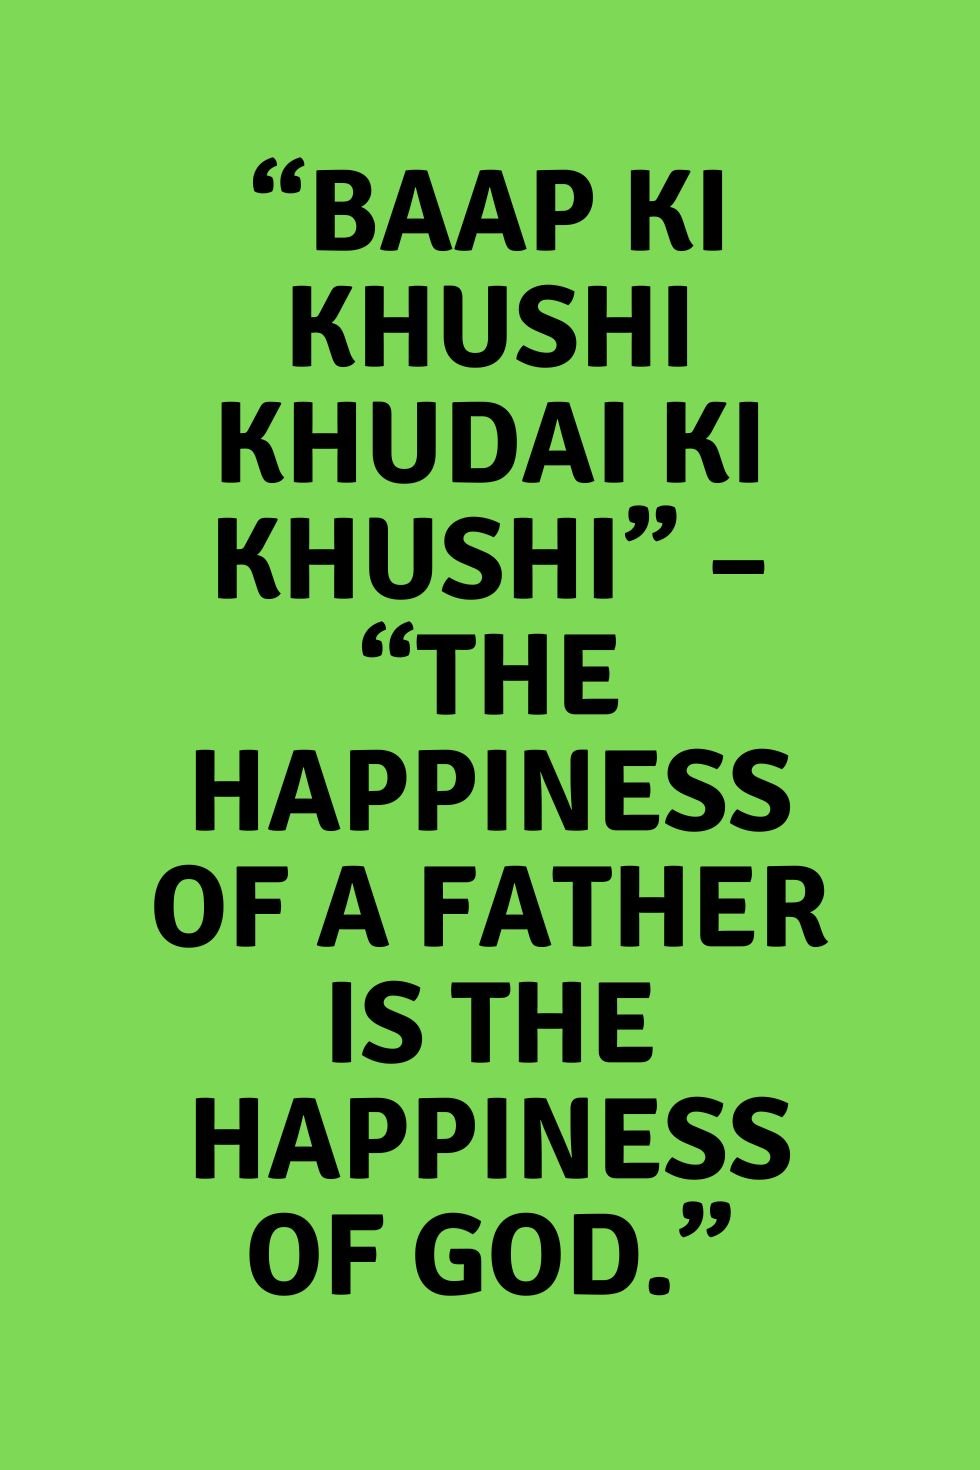 Father quotes in urdu English